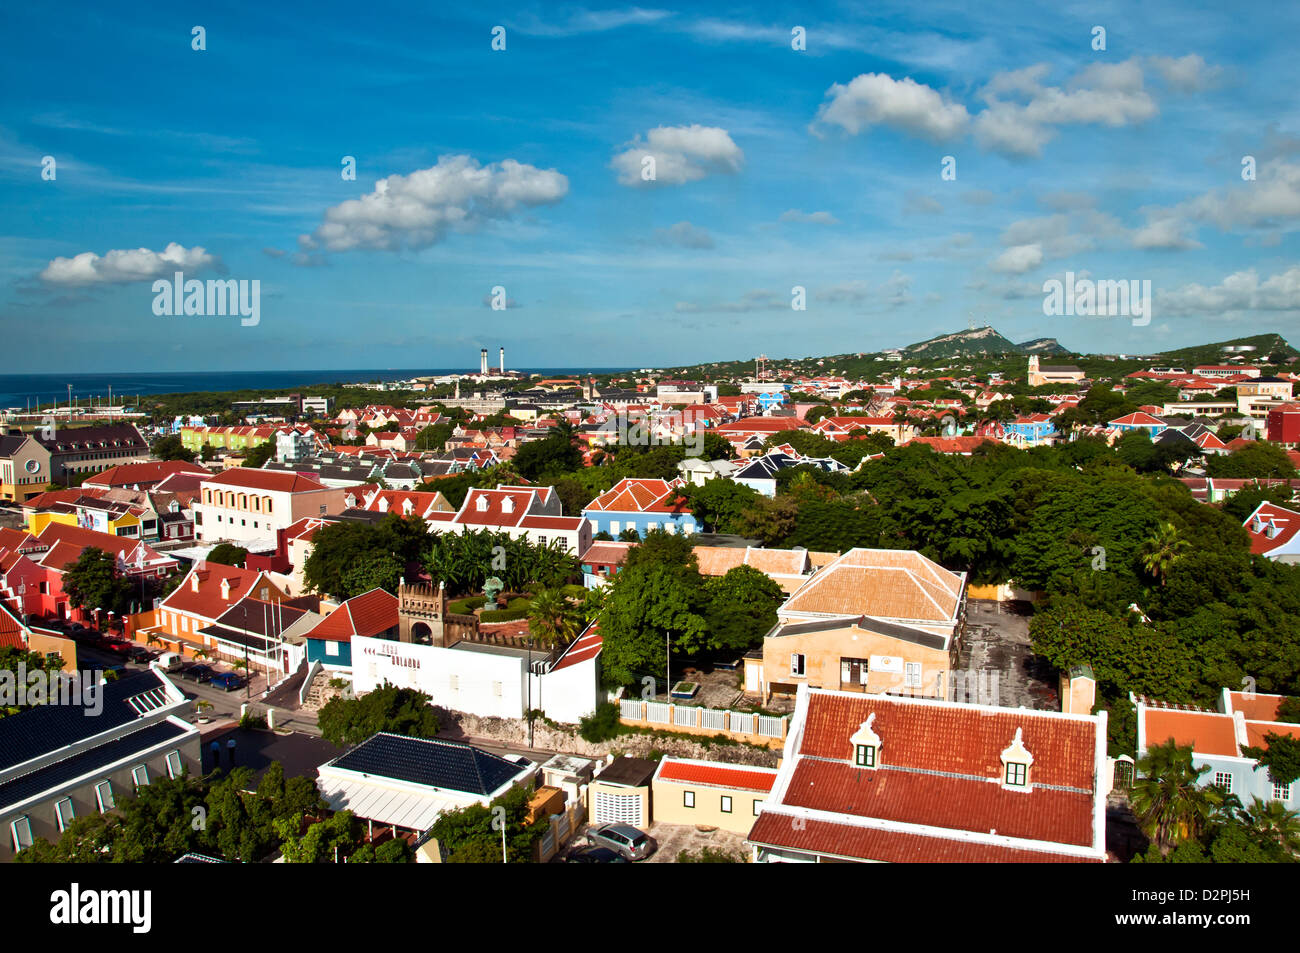 Aerial view above Otrobanda side of Willemstad, Curacao, showing colorfully painted Dutch architecture with red roofs. Stock Photo